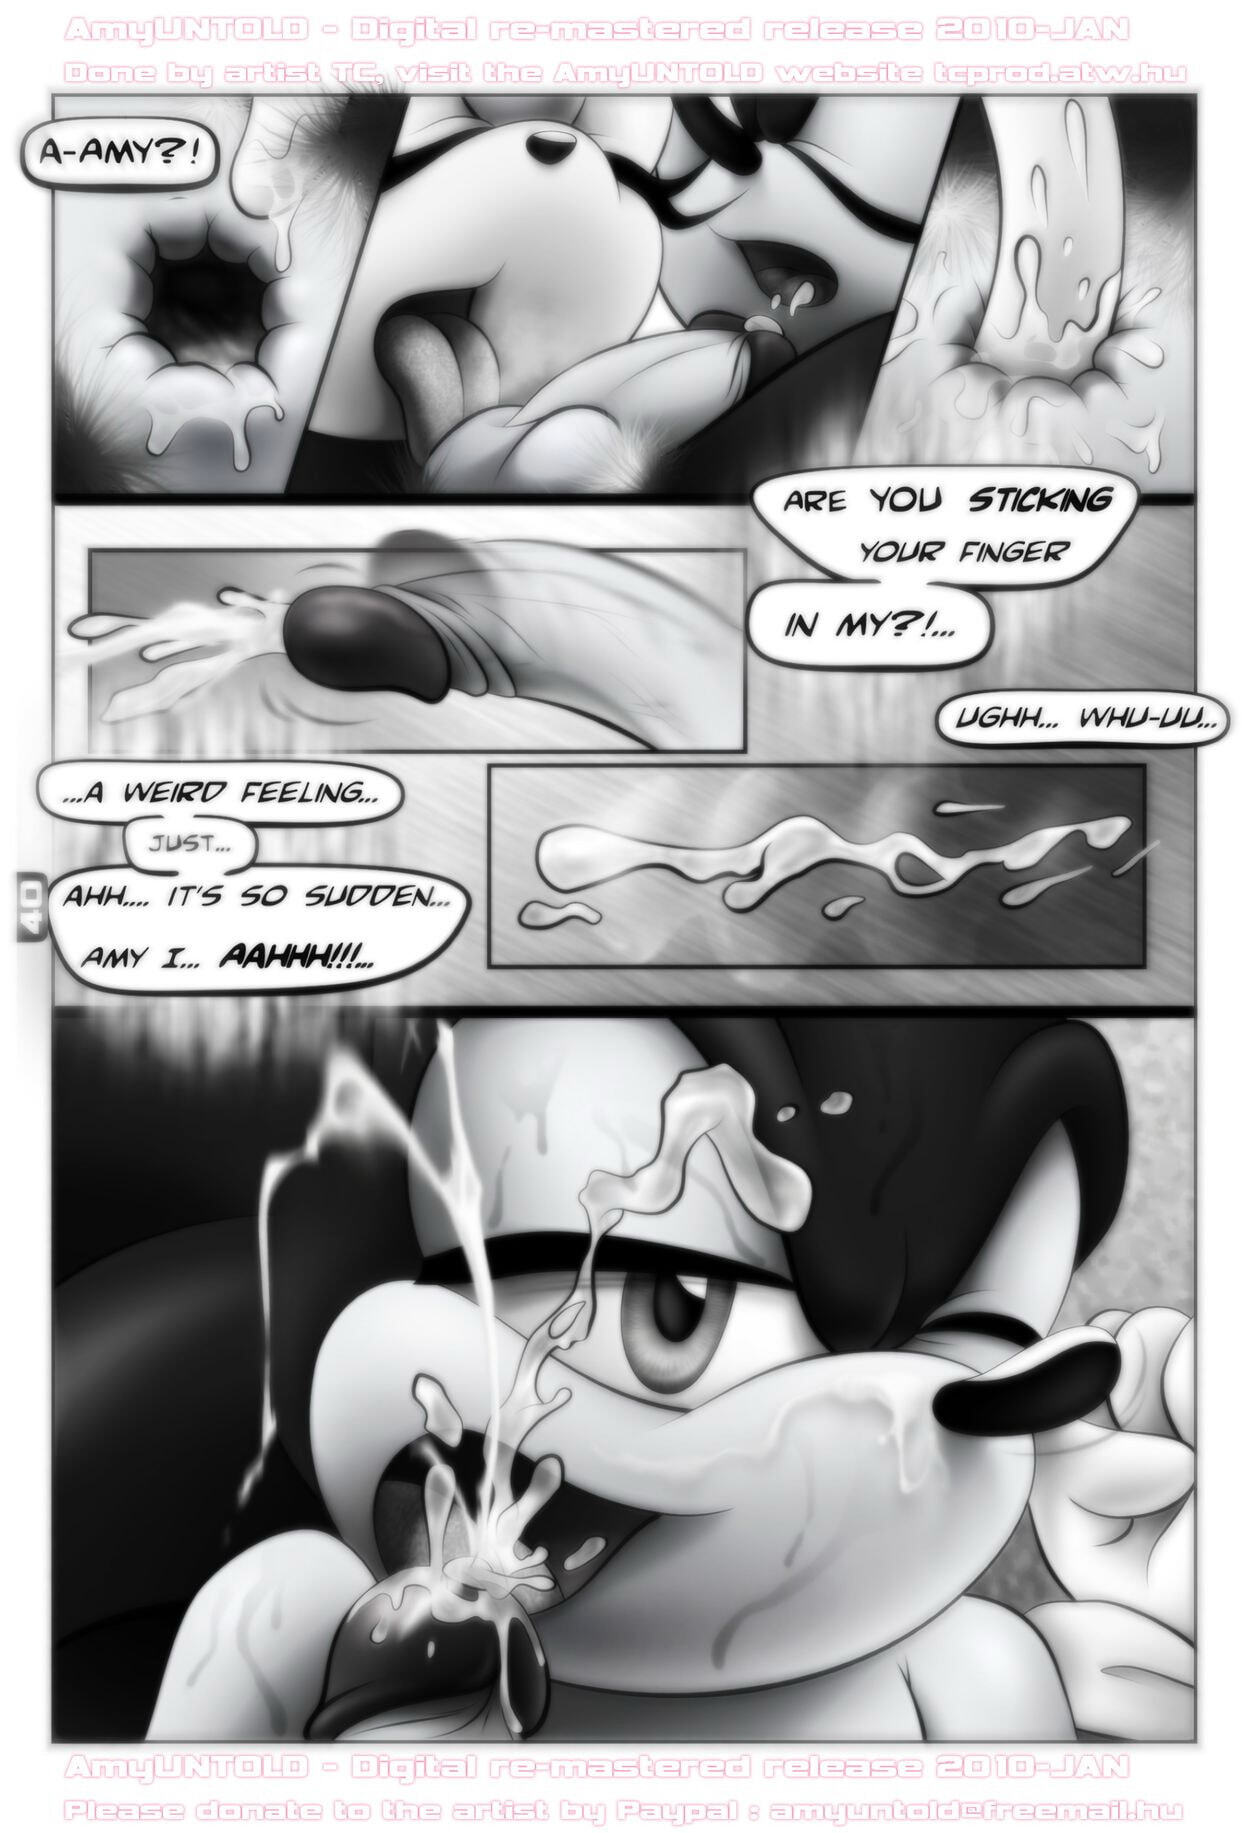 Amy Untold - Finally - Page 40